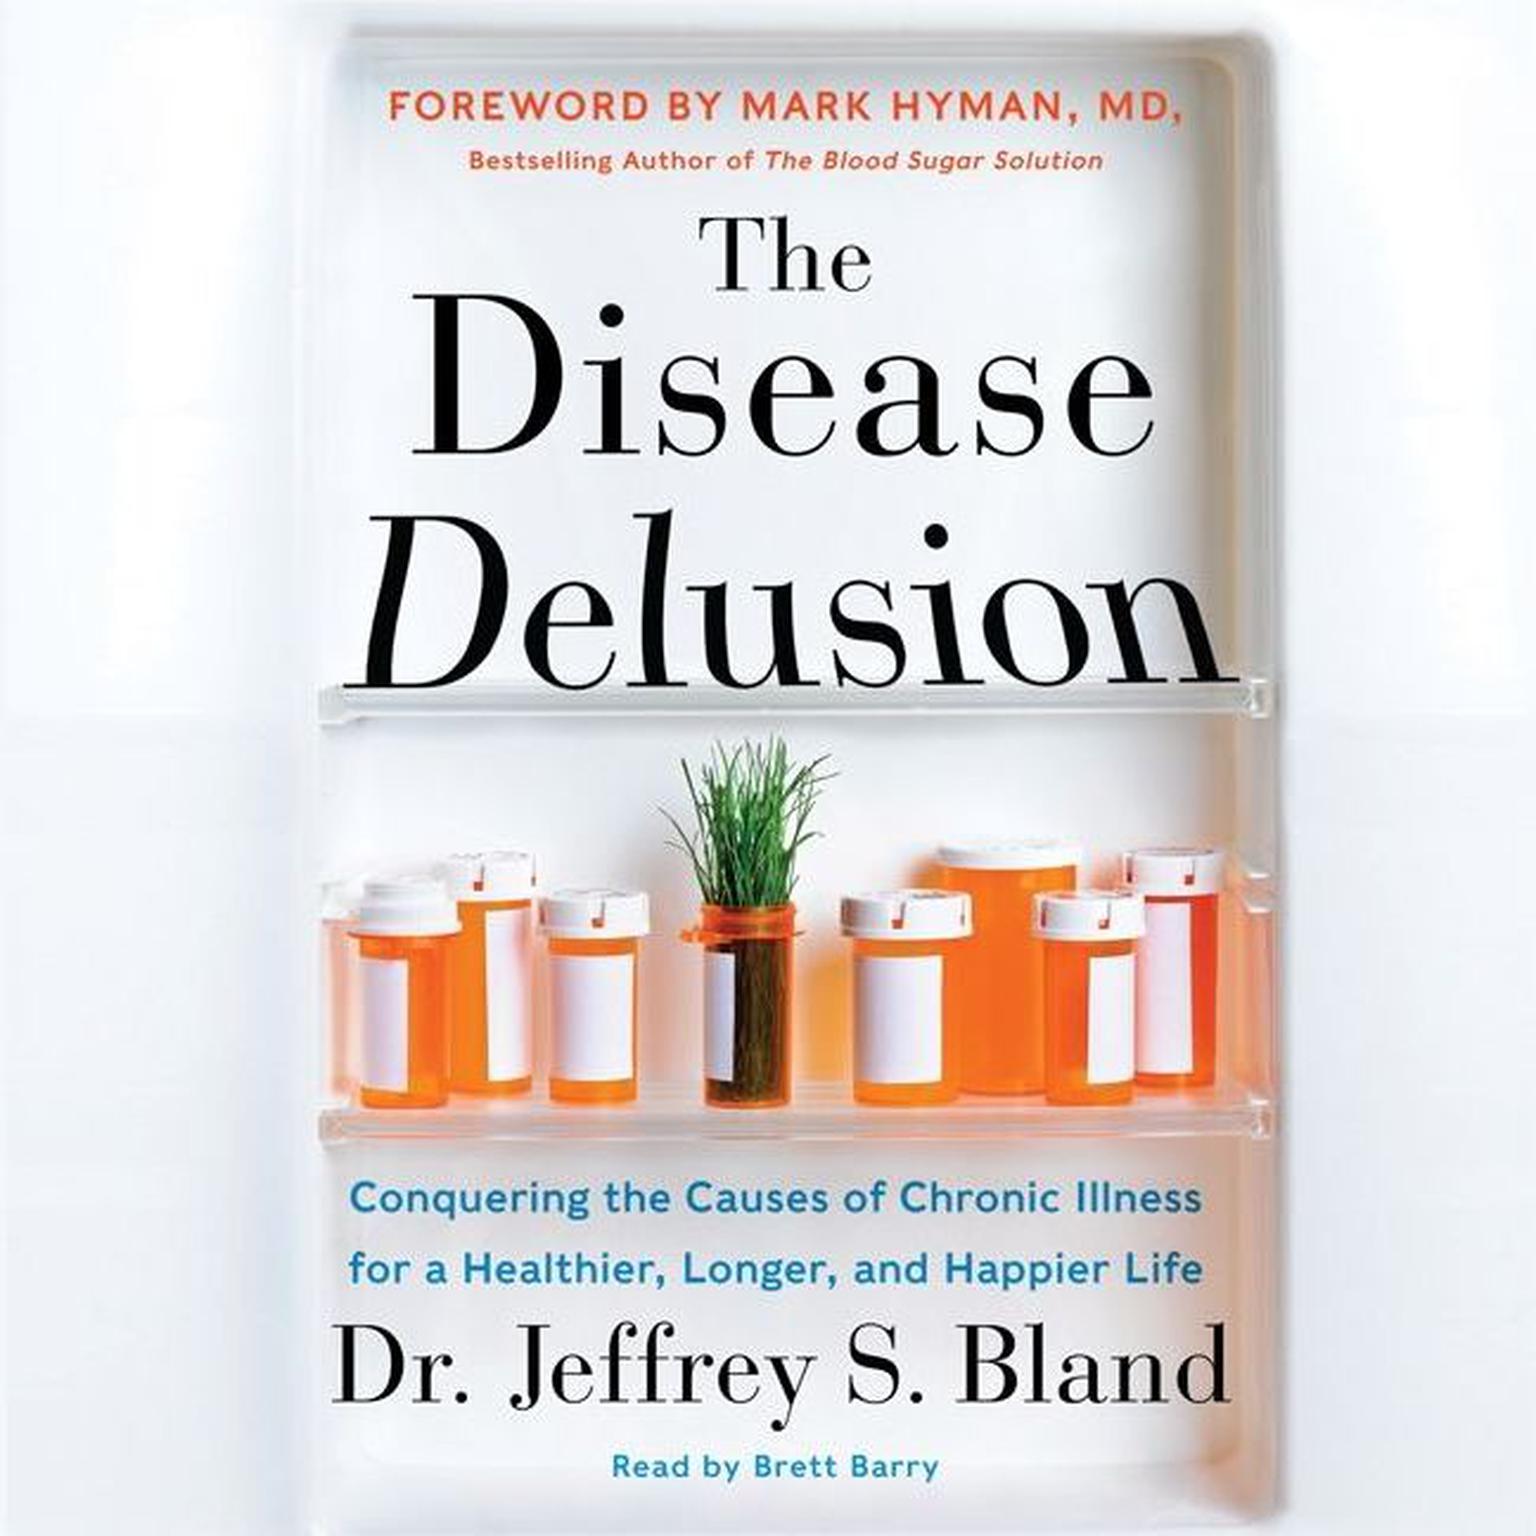 The Disease Delusion: Conquering the Causes of Chronic Illness for a Healthier, Longer, and Happier Life Audiobook, by Jeffrey S. Bland